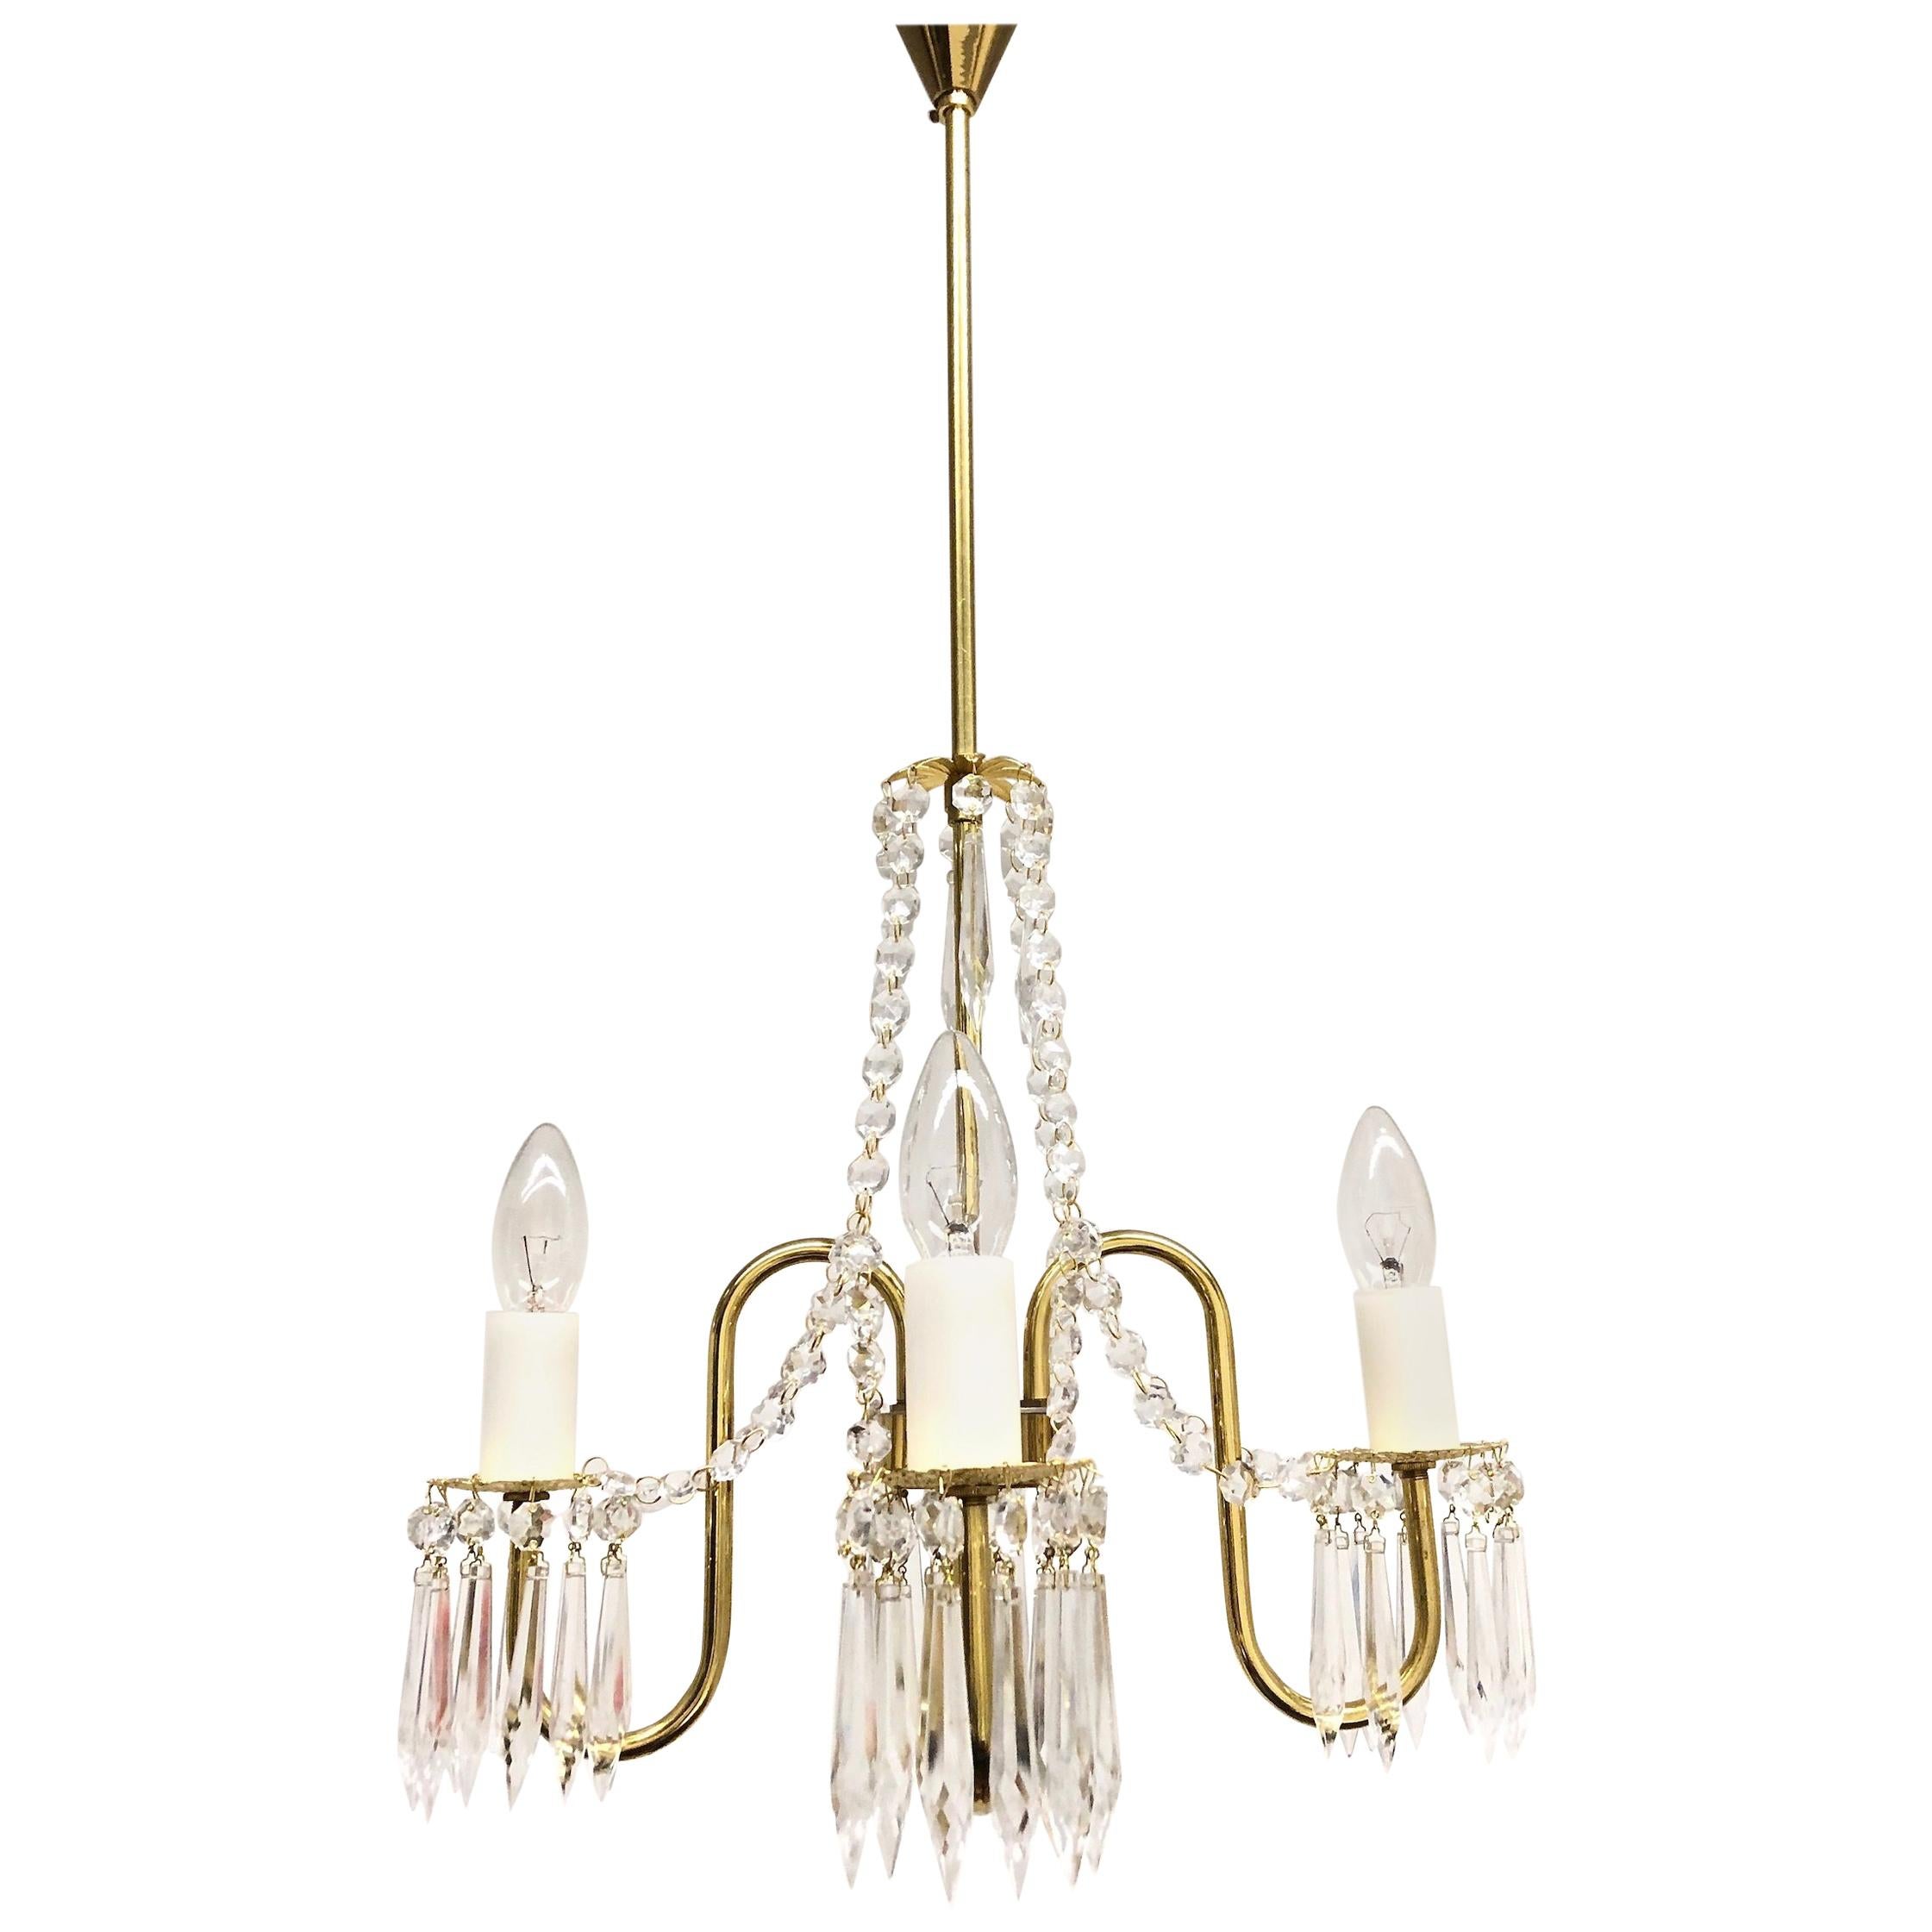 Empire Style Crystal Chandelier with Four Lights, 1950s, Austria